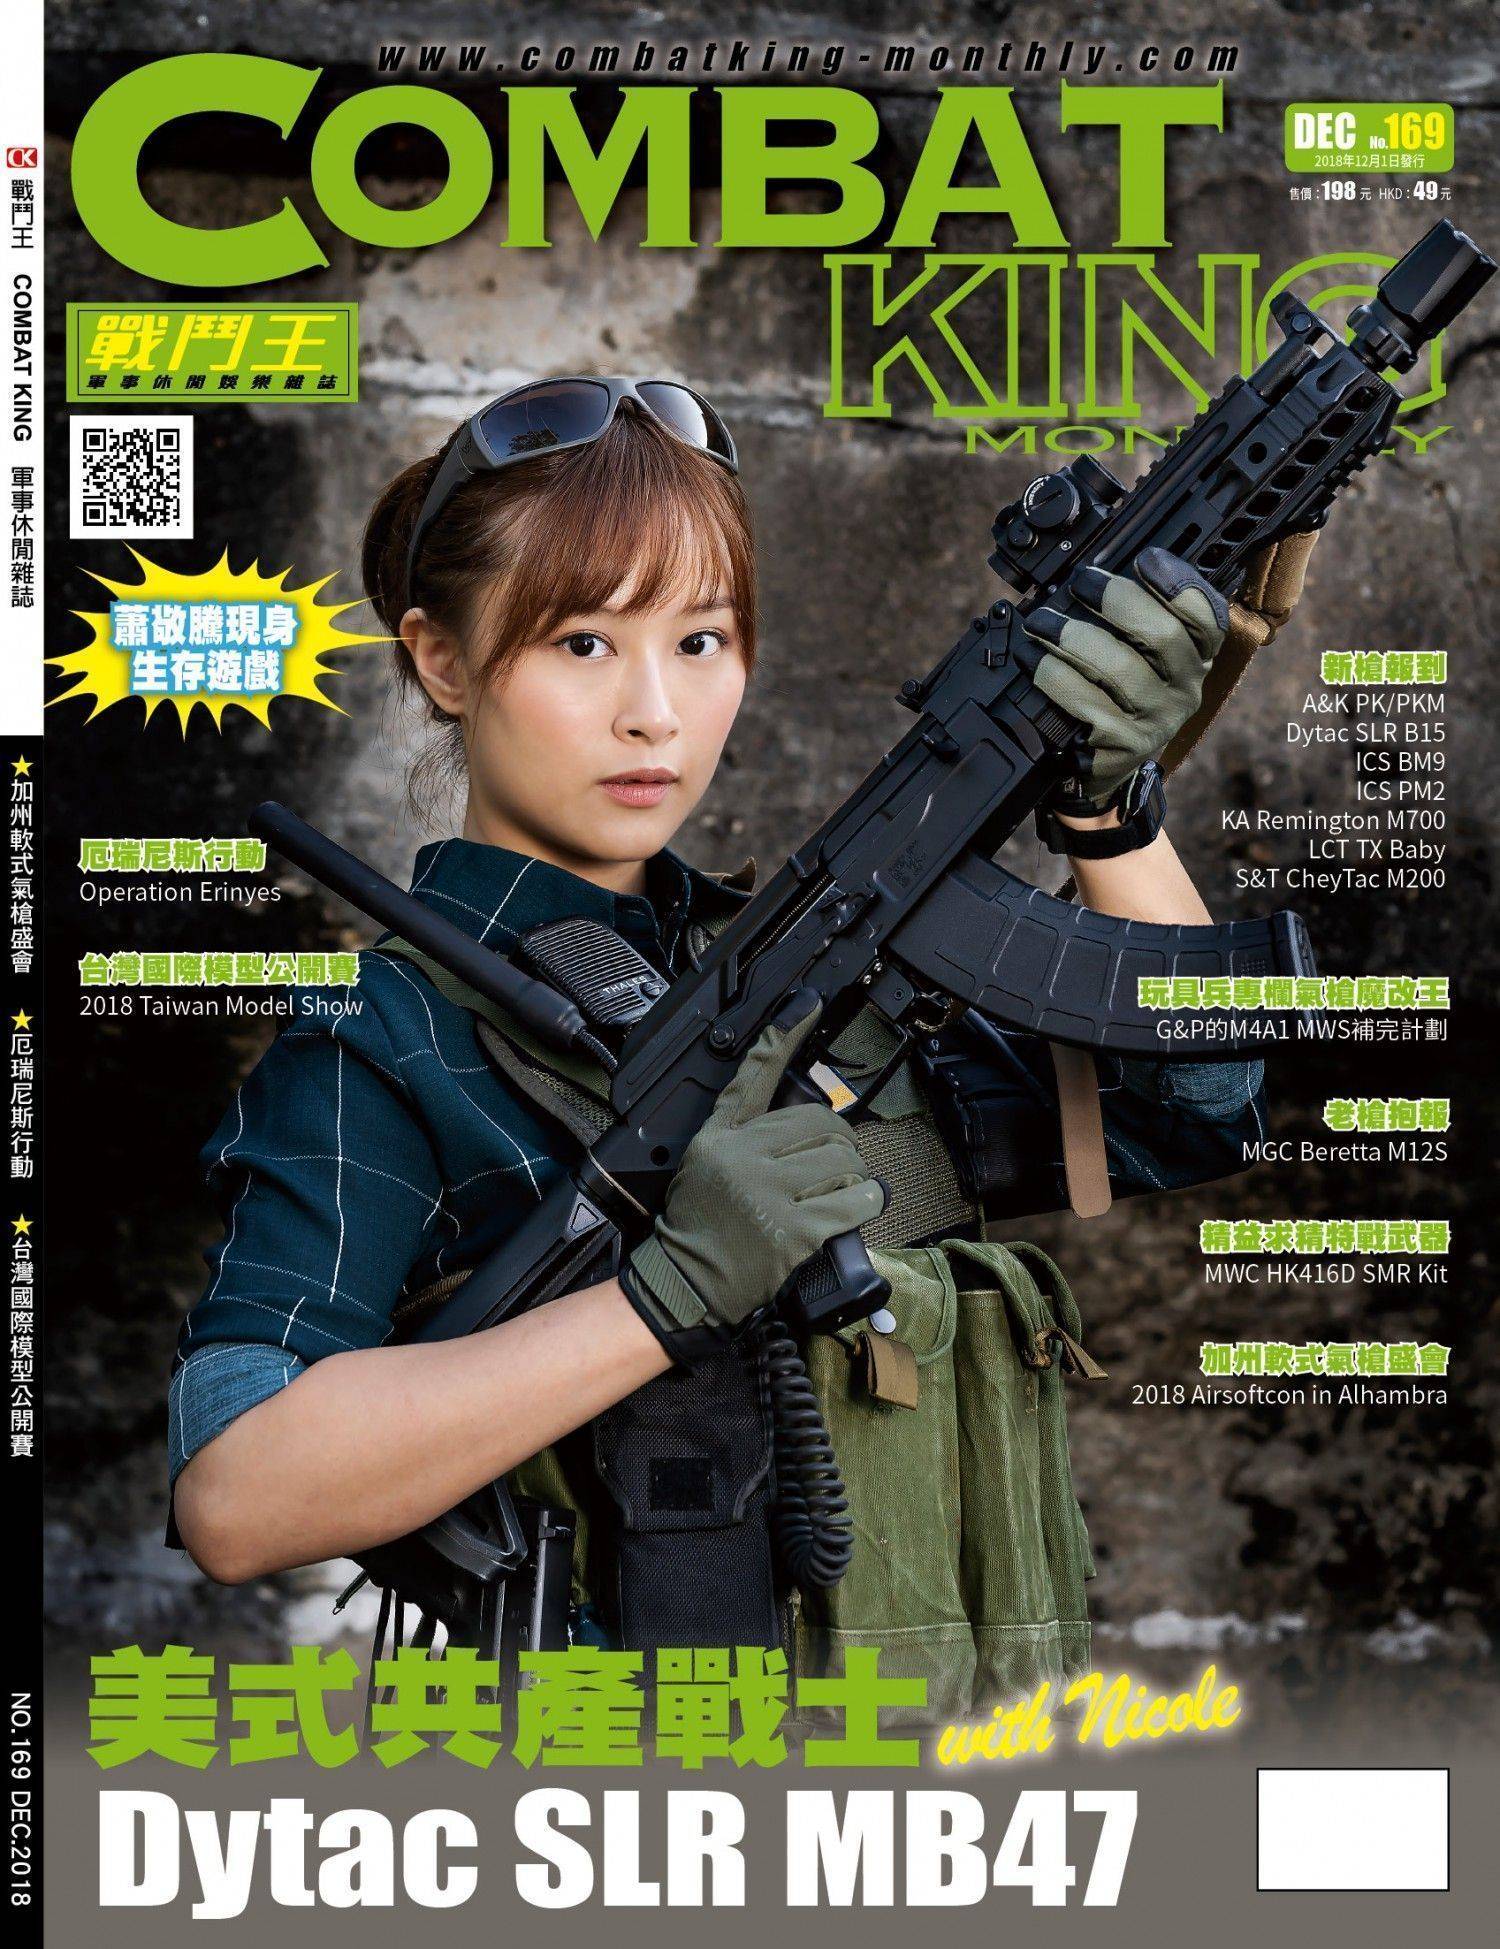 Combat King Monthly Issue169 Dec. 2018